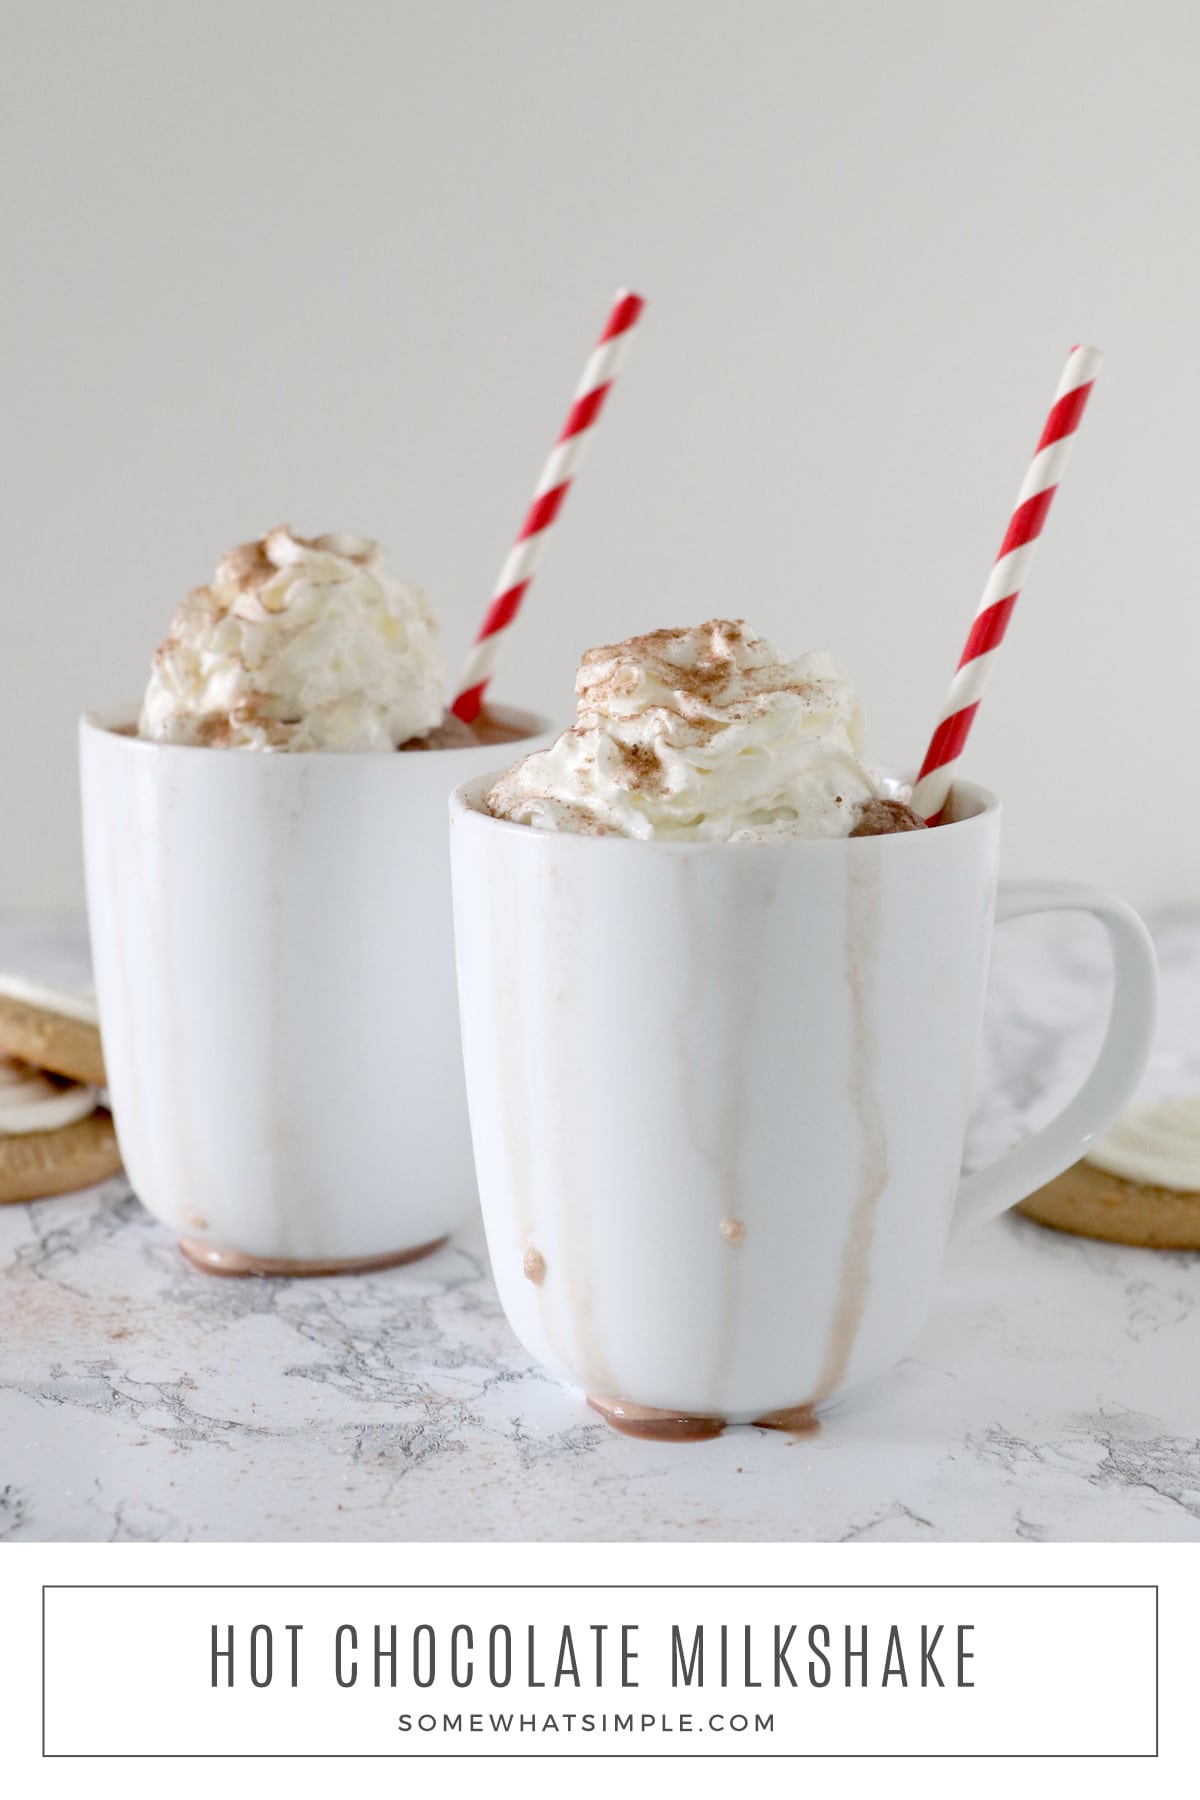 Kick back and cozy up with a cup of Frozen Hot Chocolate! This decadent drink with 4 ingredients is made in just minutes without any fuss! via @somewhatsimple